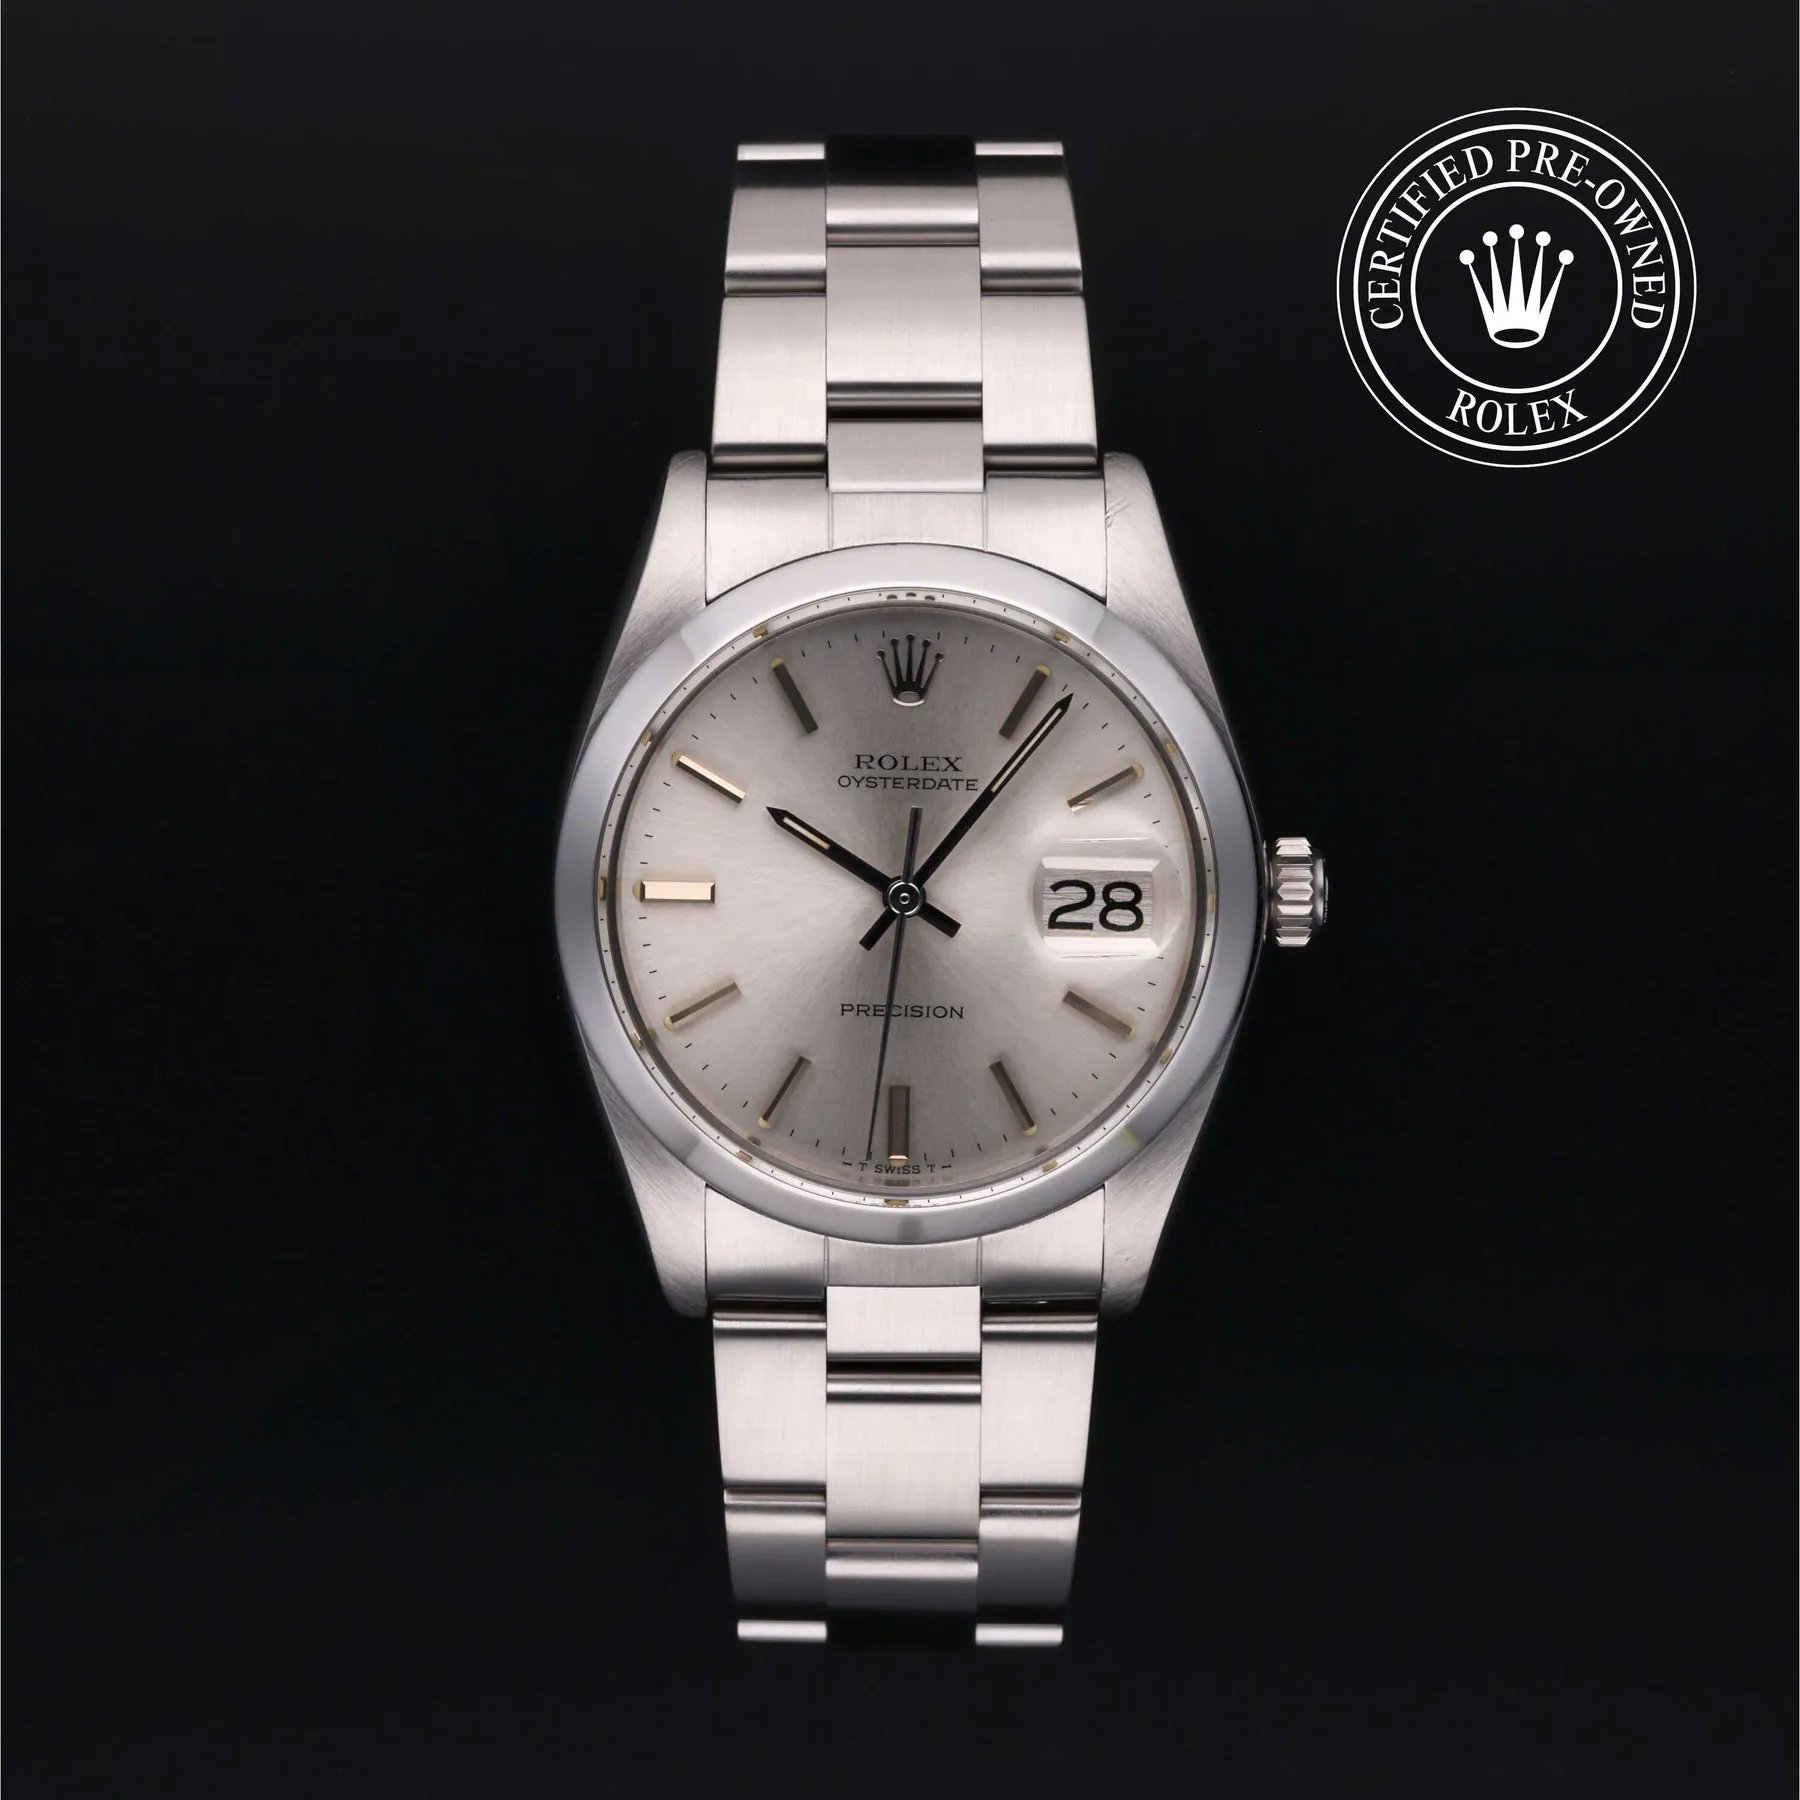 Rolex Oysterdate Precision 6694/0 34mm Stainless steel Silver